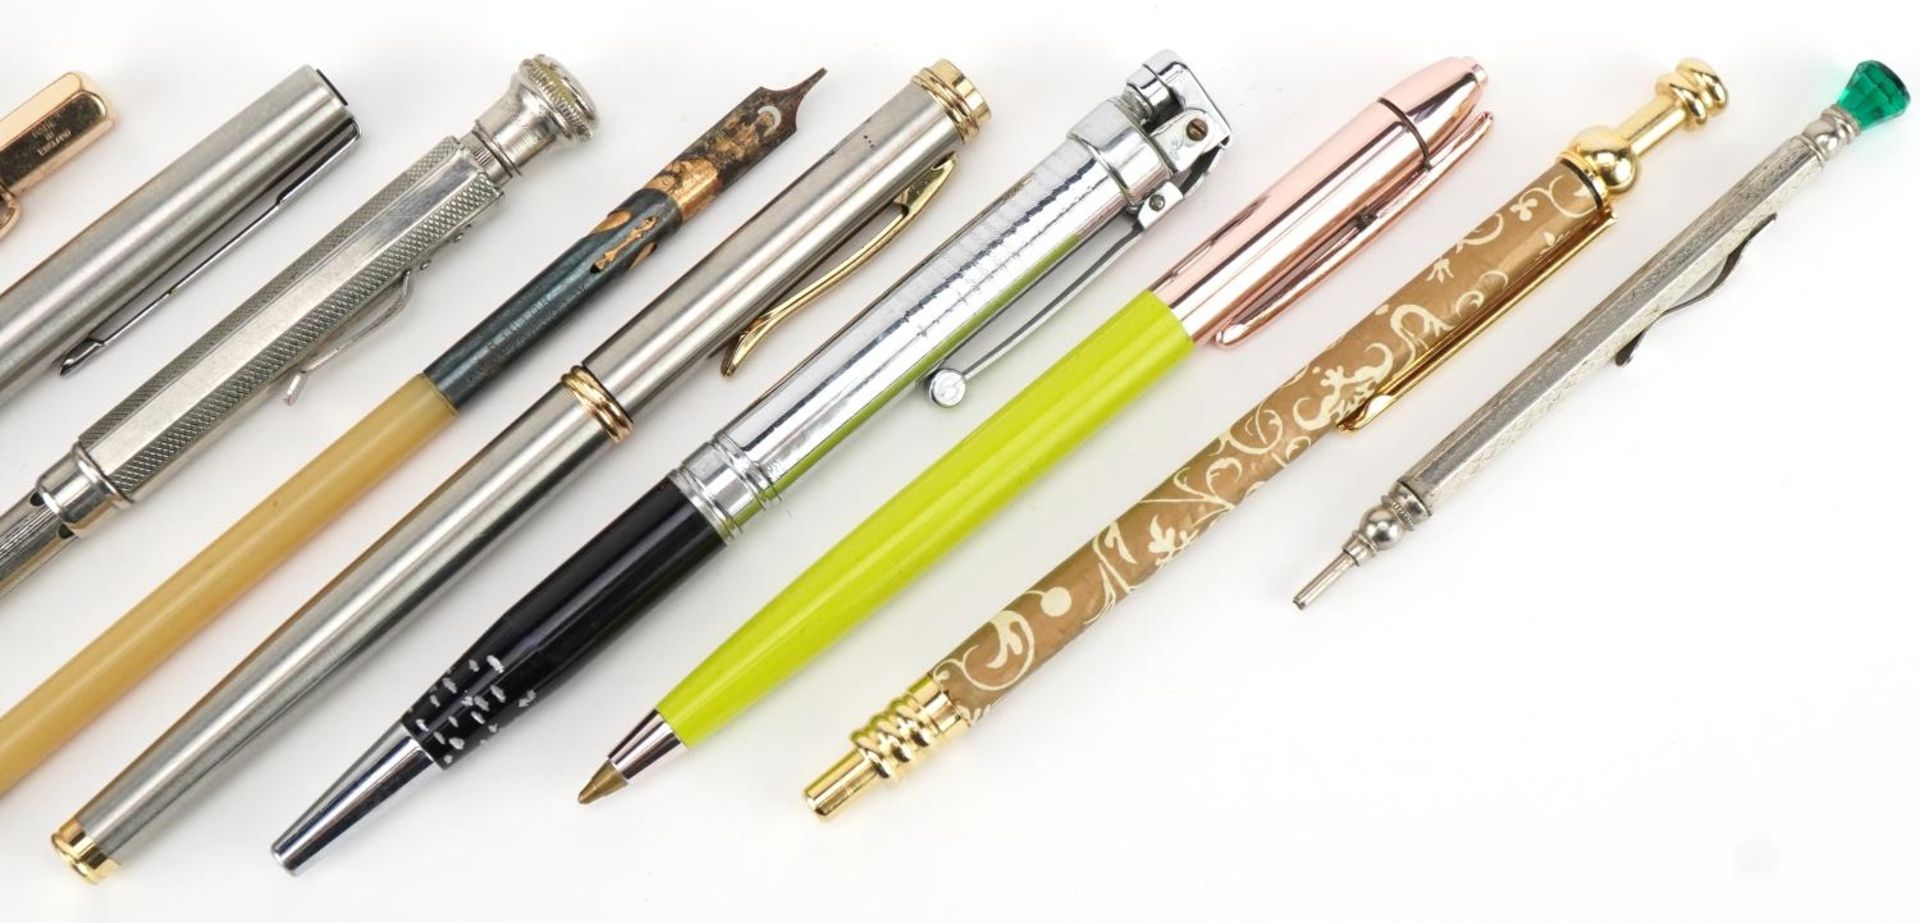 Vintage and later pens and pencils including Balita with lighter and rolled gold propelling pencil : - Image 3 of 5